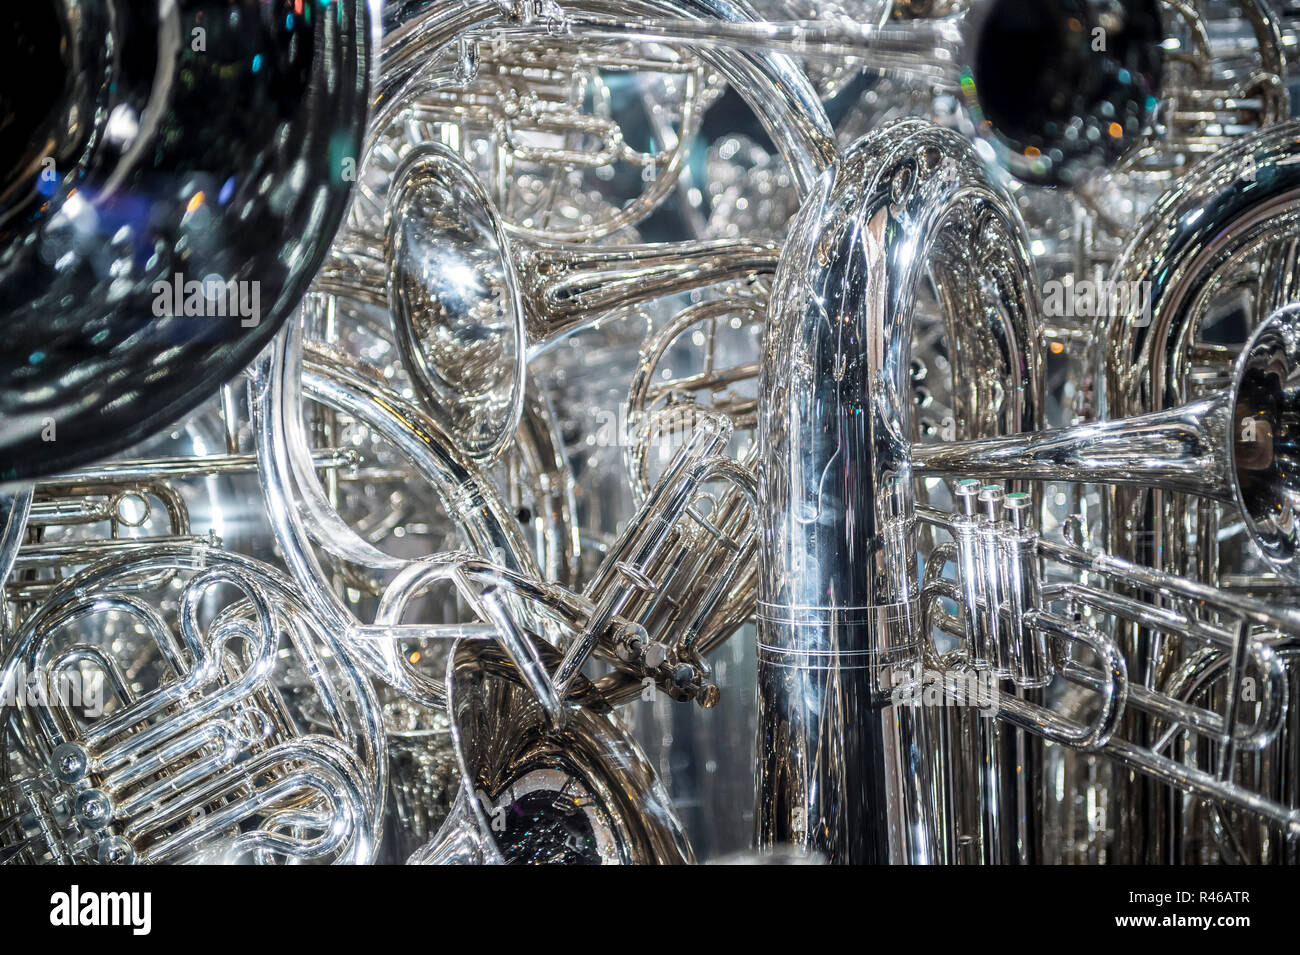 Shiny musical instruments from the horn section in a close up abstract textured background Stock Photo